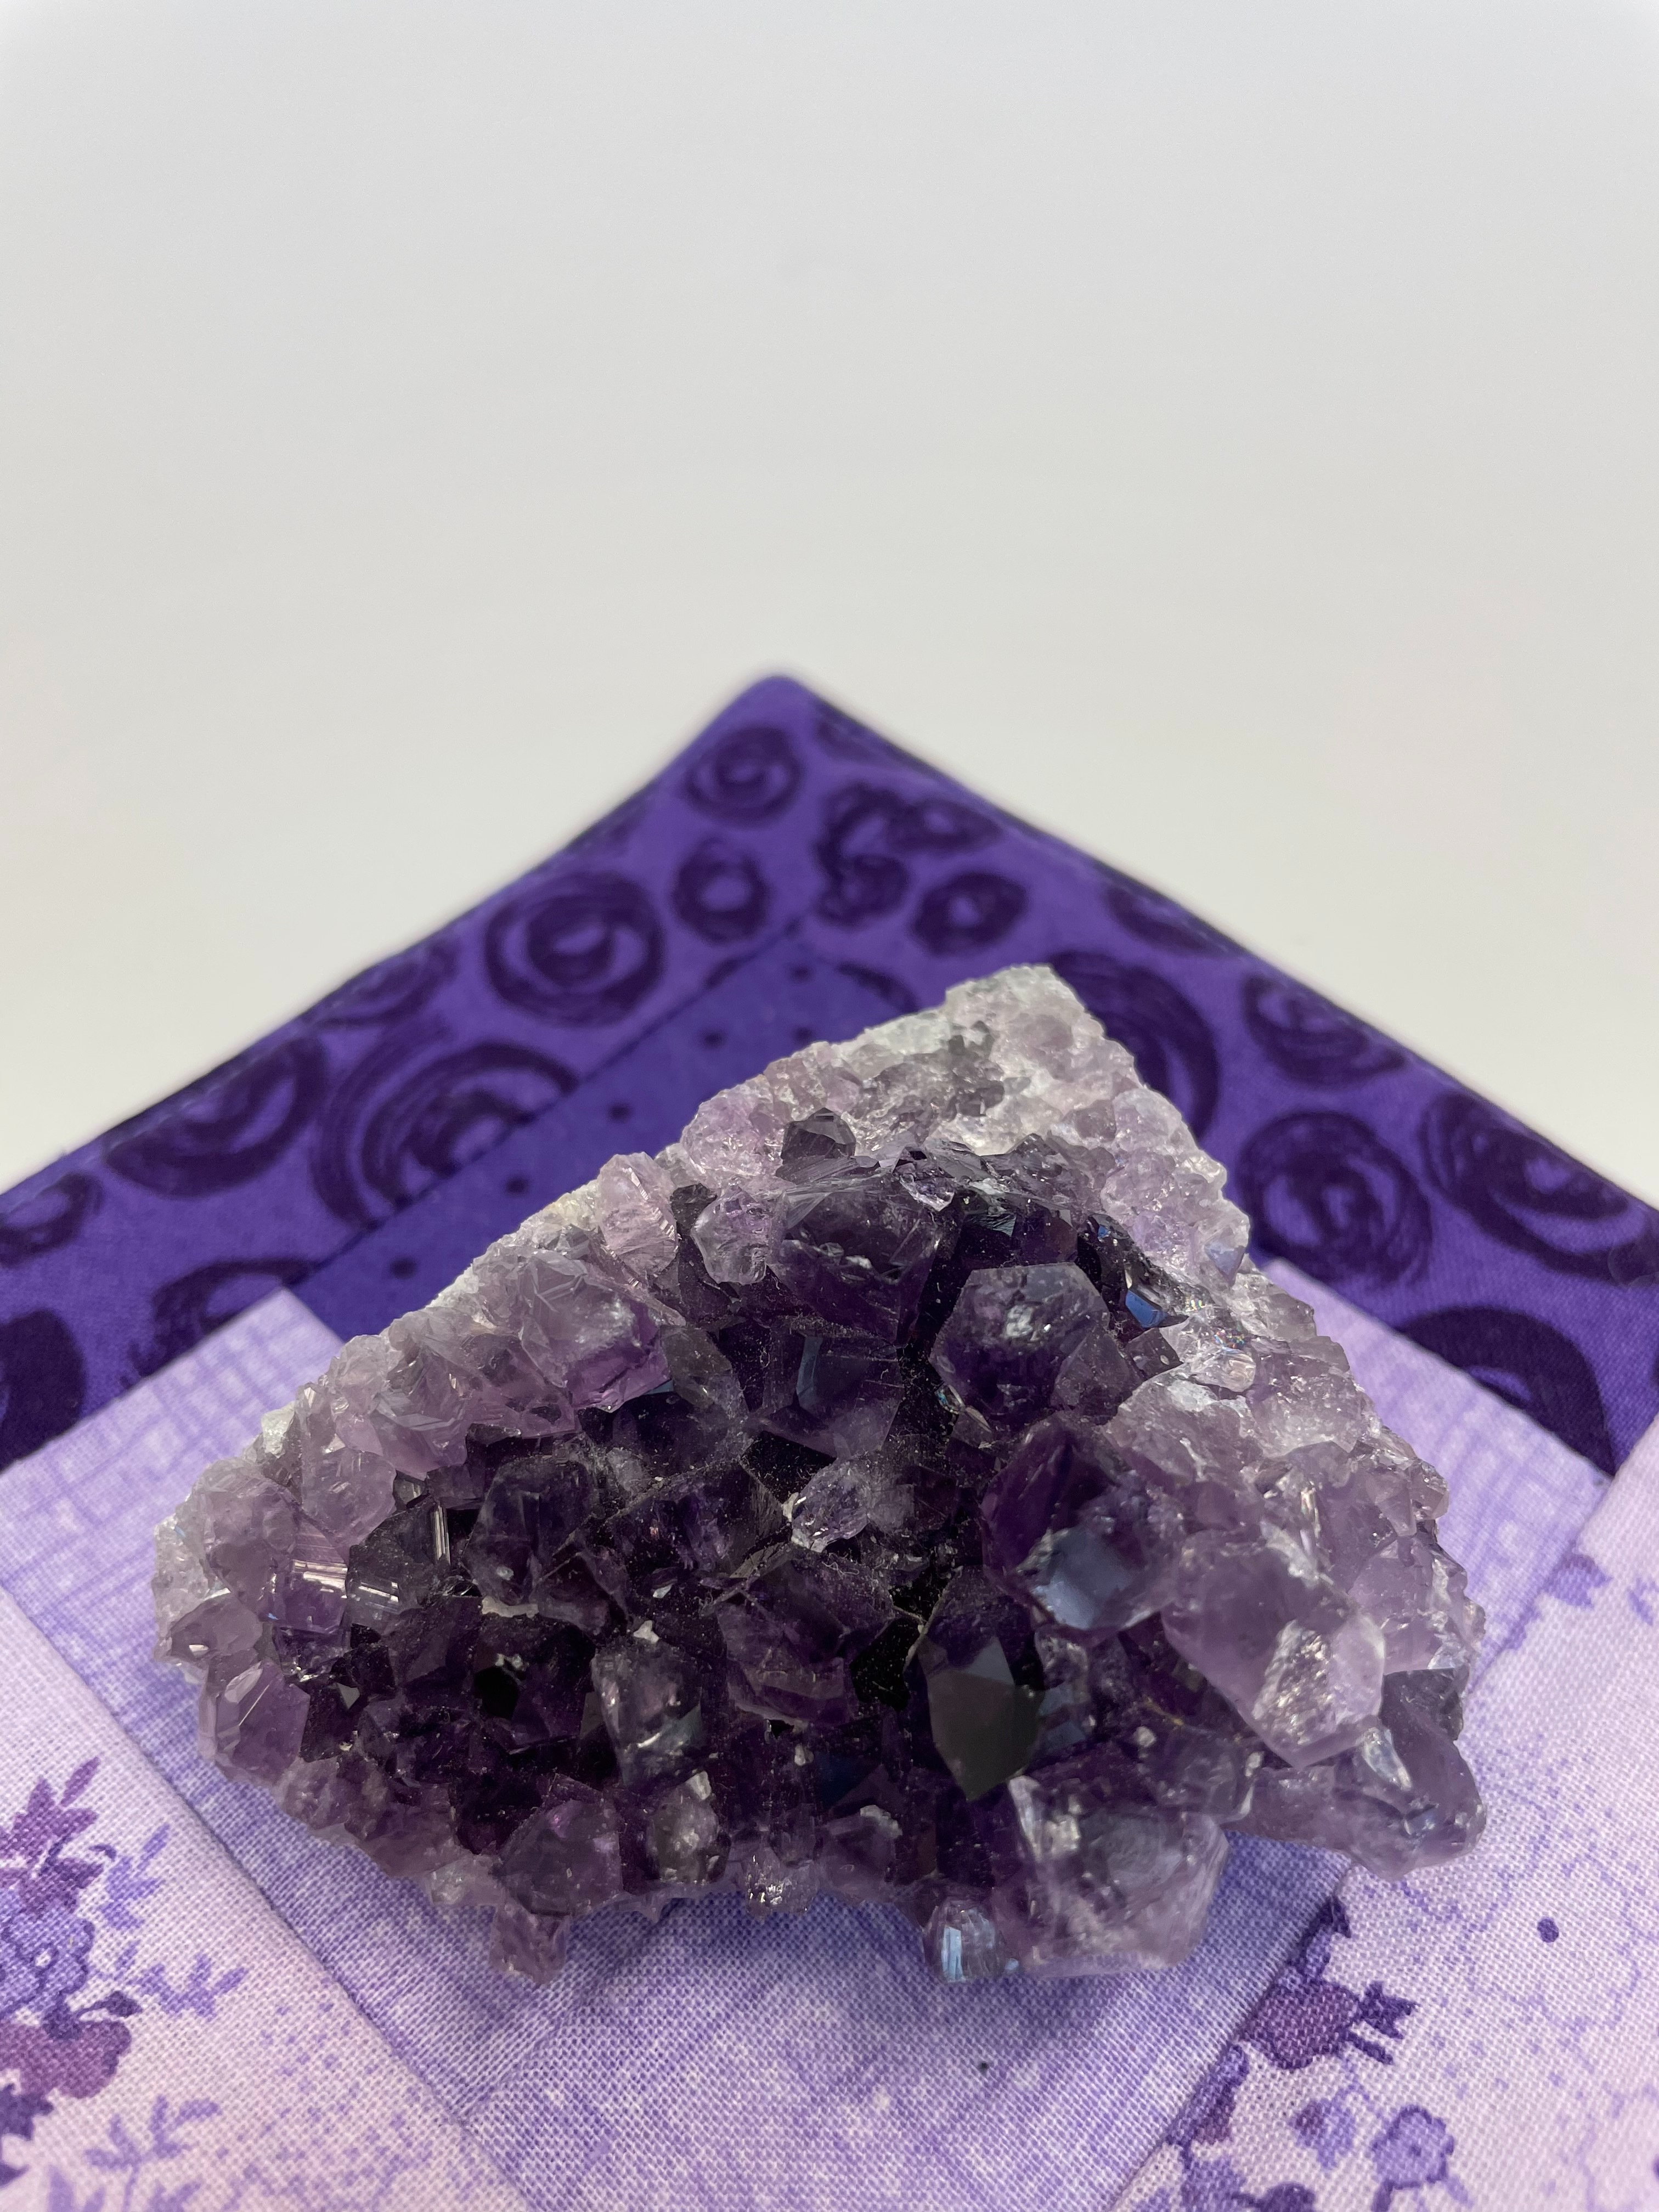 Glittering amethyst geode piece is lovely to use for its properties and also as a lovely piece for your altar, bookshelf or nightstand. Amethyst, one of the most spiritual gemstones, heals, cleanses & calms, allowing you to reach meditative & higher consciousness levels more easily. It also helps to dispel negative emotional states (and so much more). Cost $5.98.